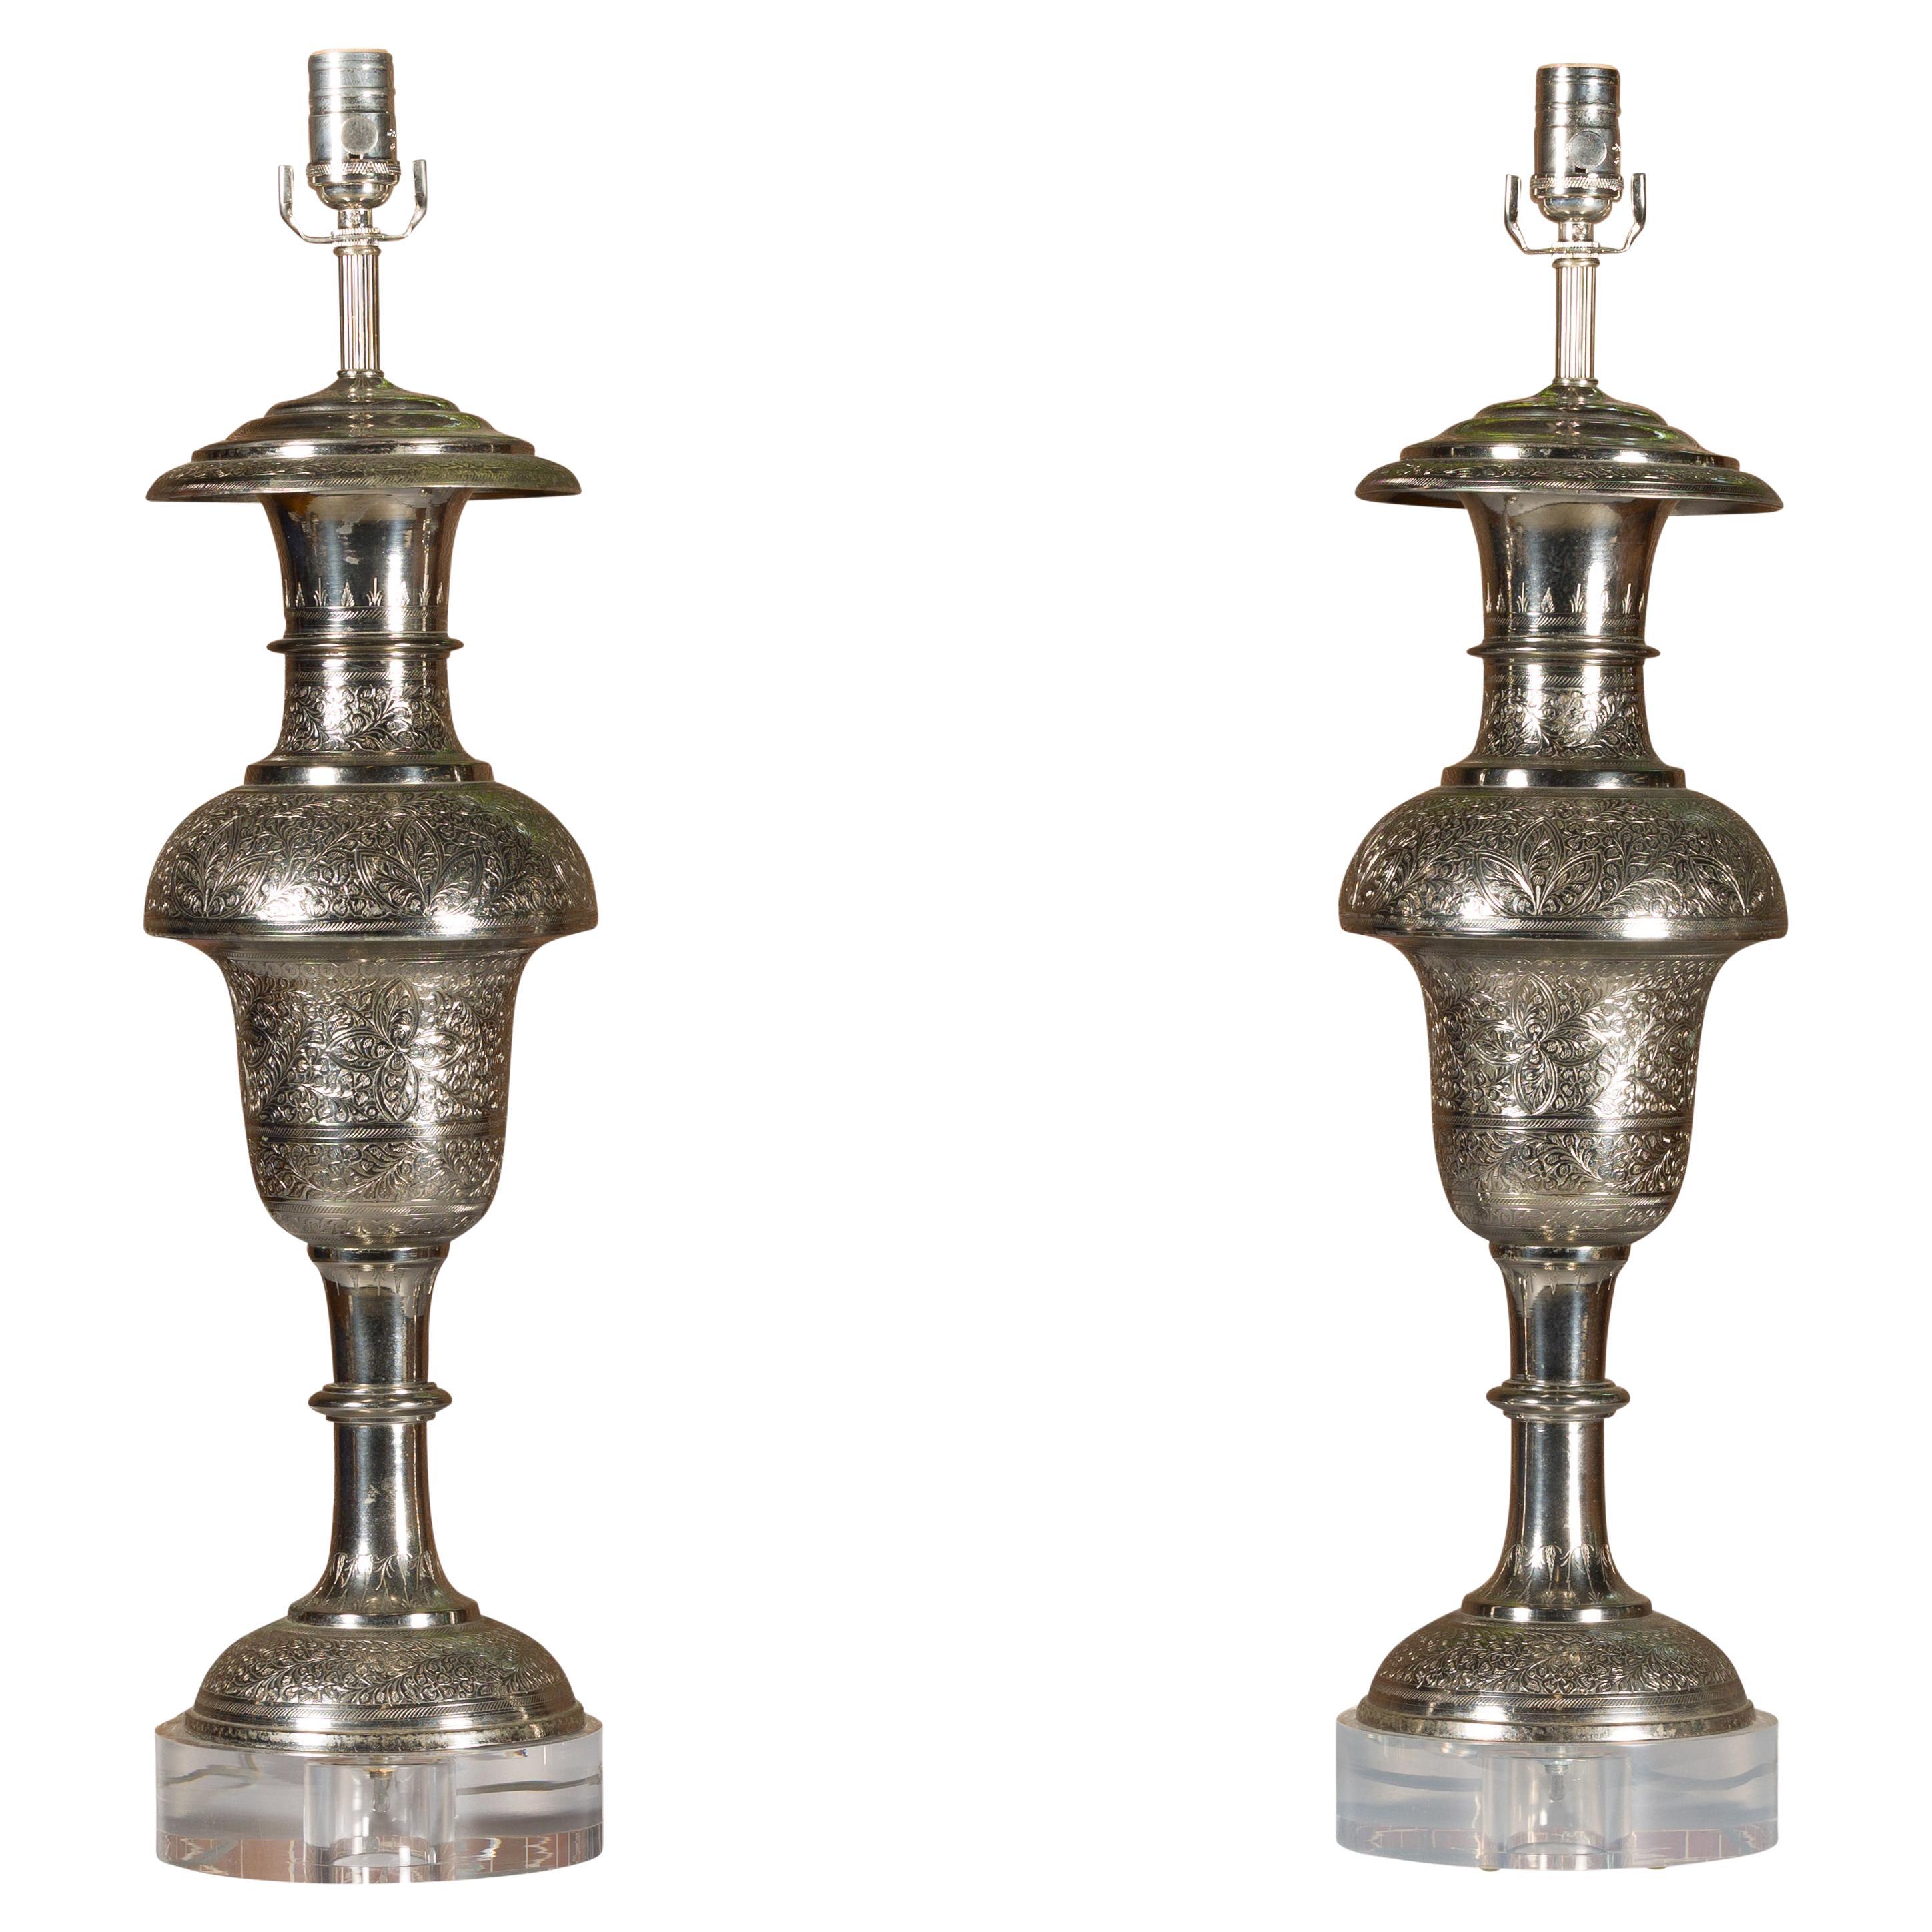 Pair of Moroccan Tôle Lamps on Lucite Bases with Etched Floral Décor, Midcentury For Sale